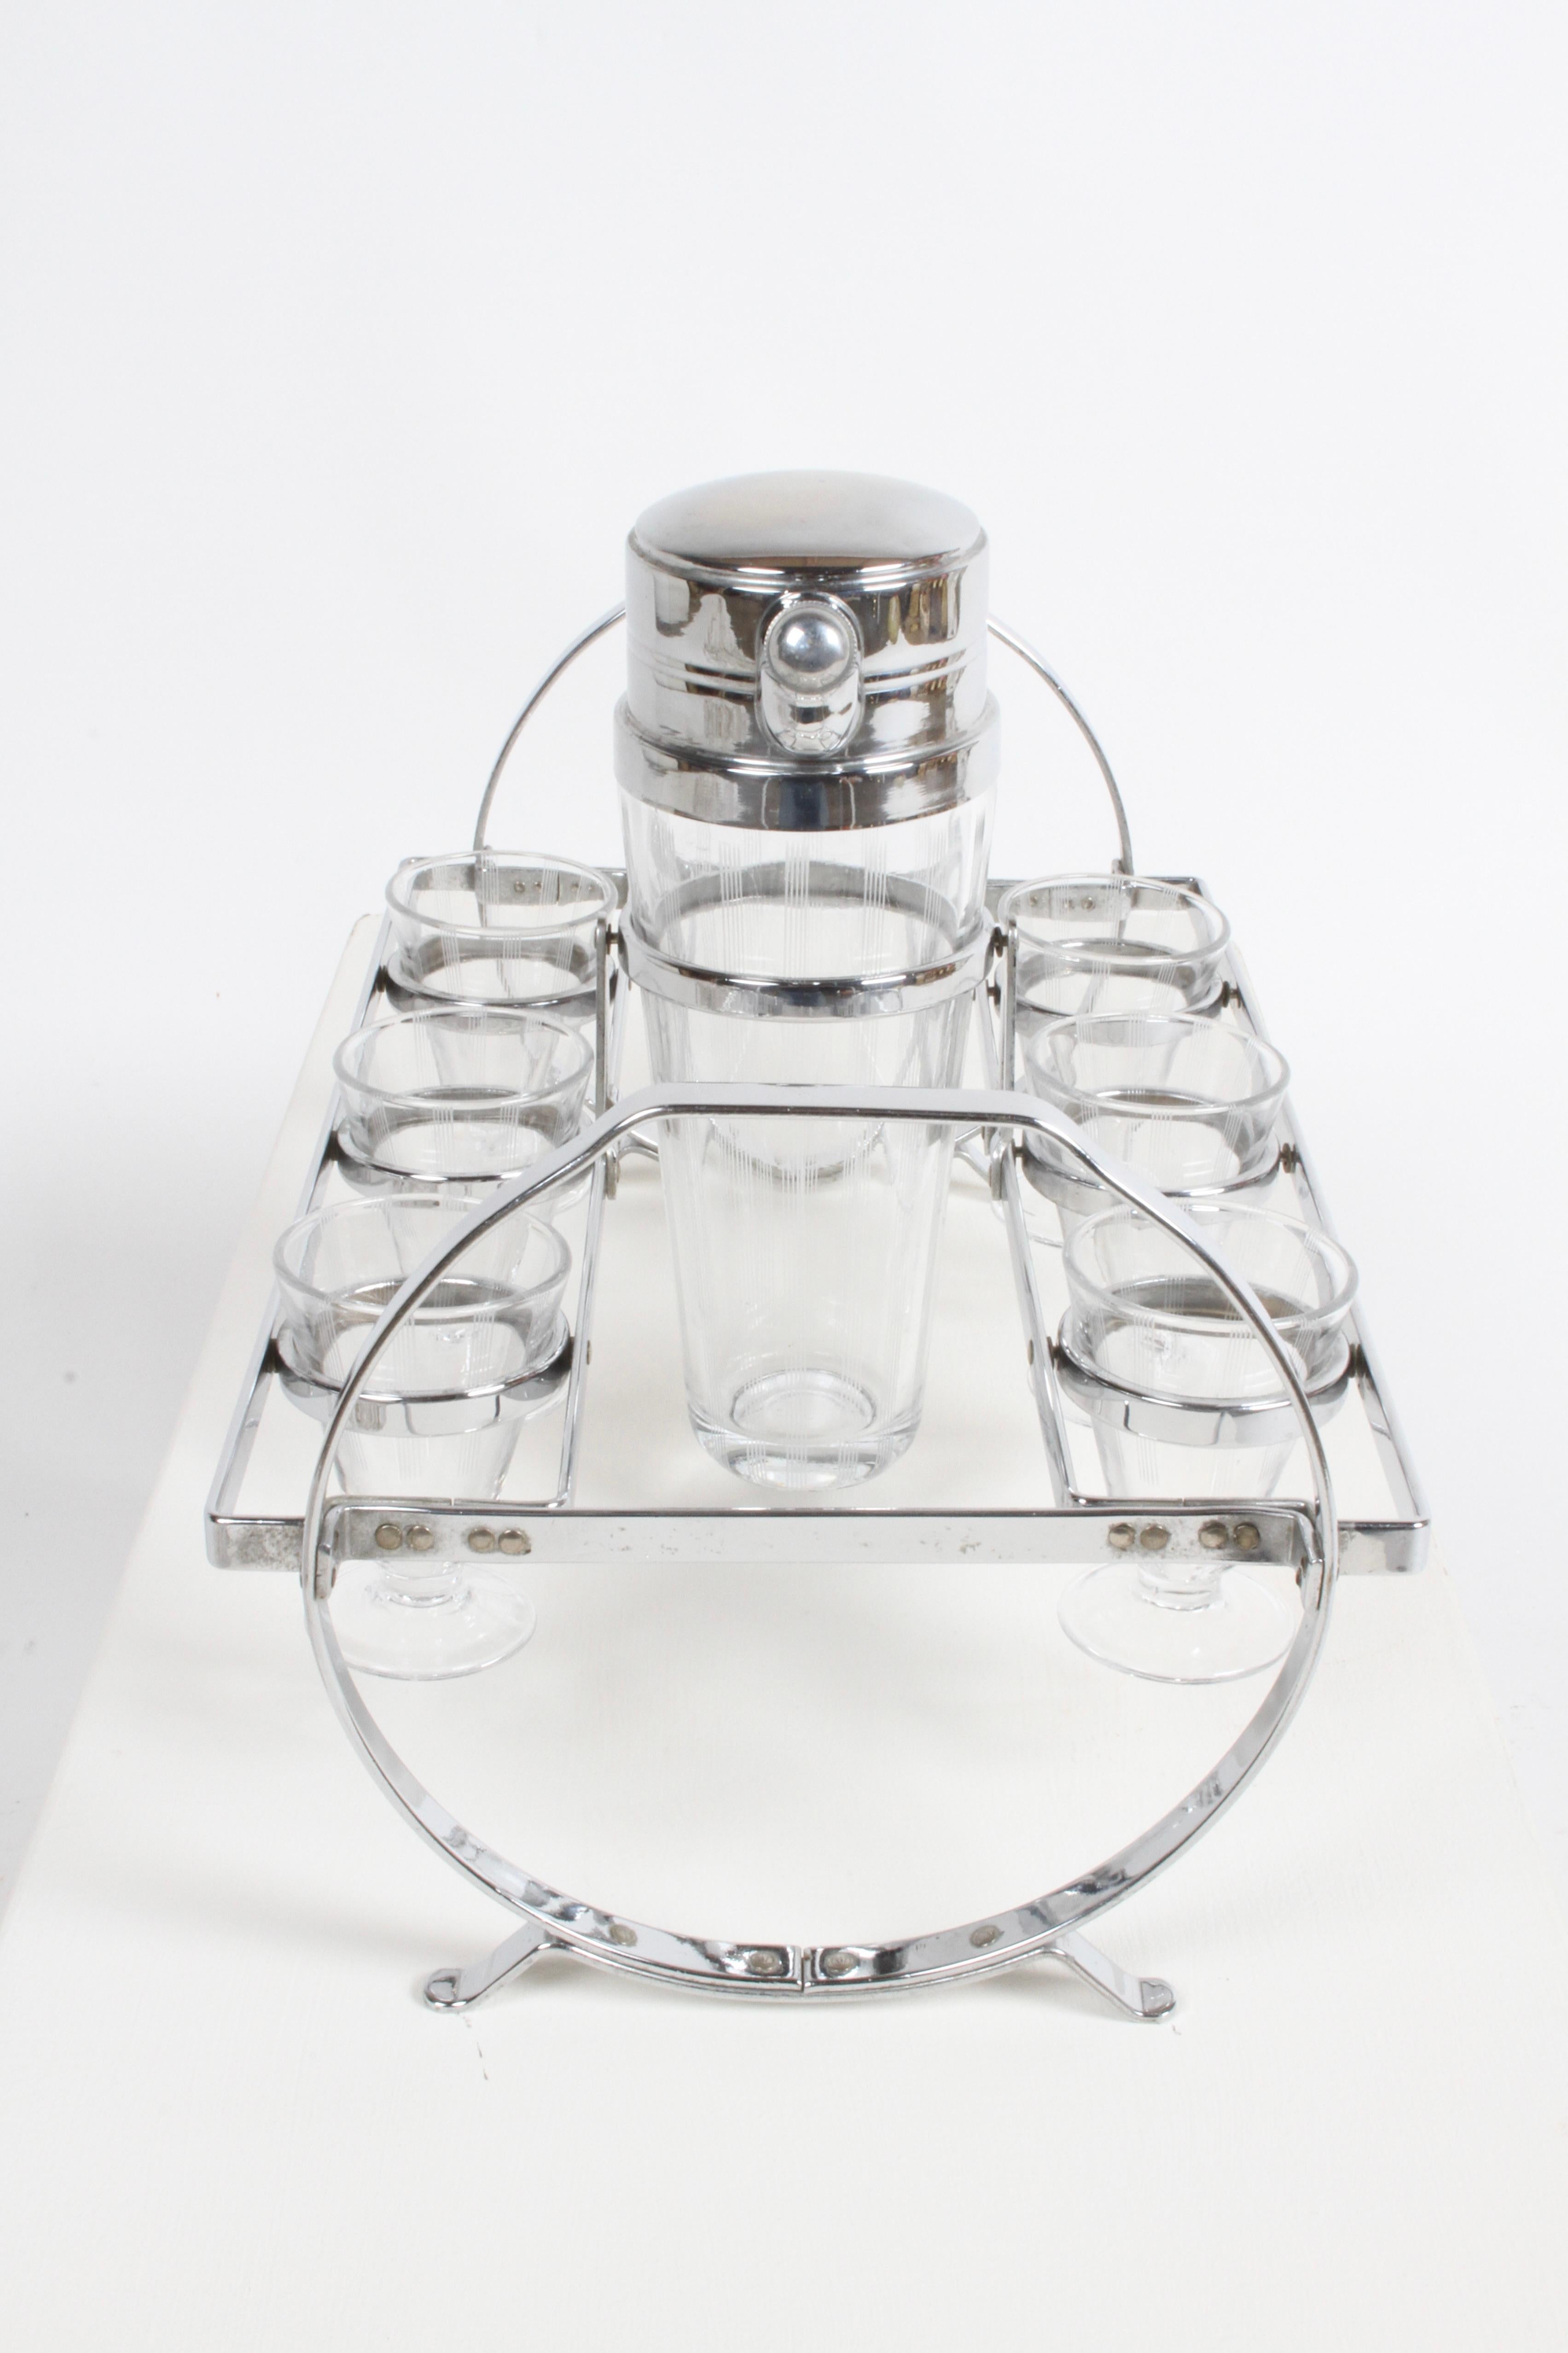 1930s Art Deco Chrome Cocktail Shaker with Six Glasses on Gyroscopic Caddy Stand For Sale 1